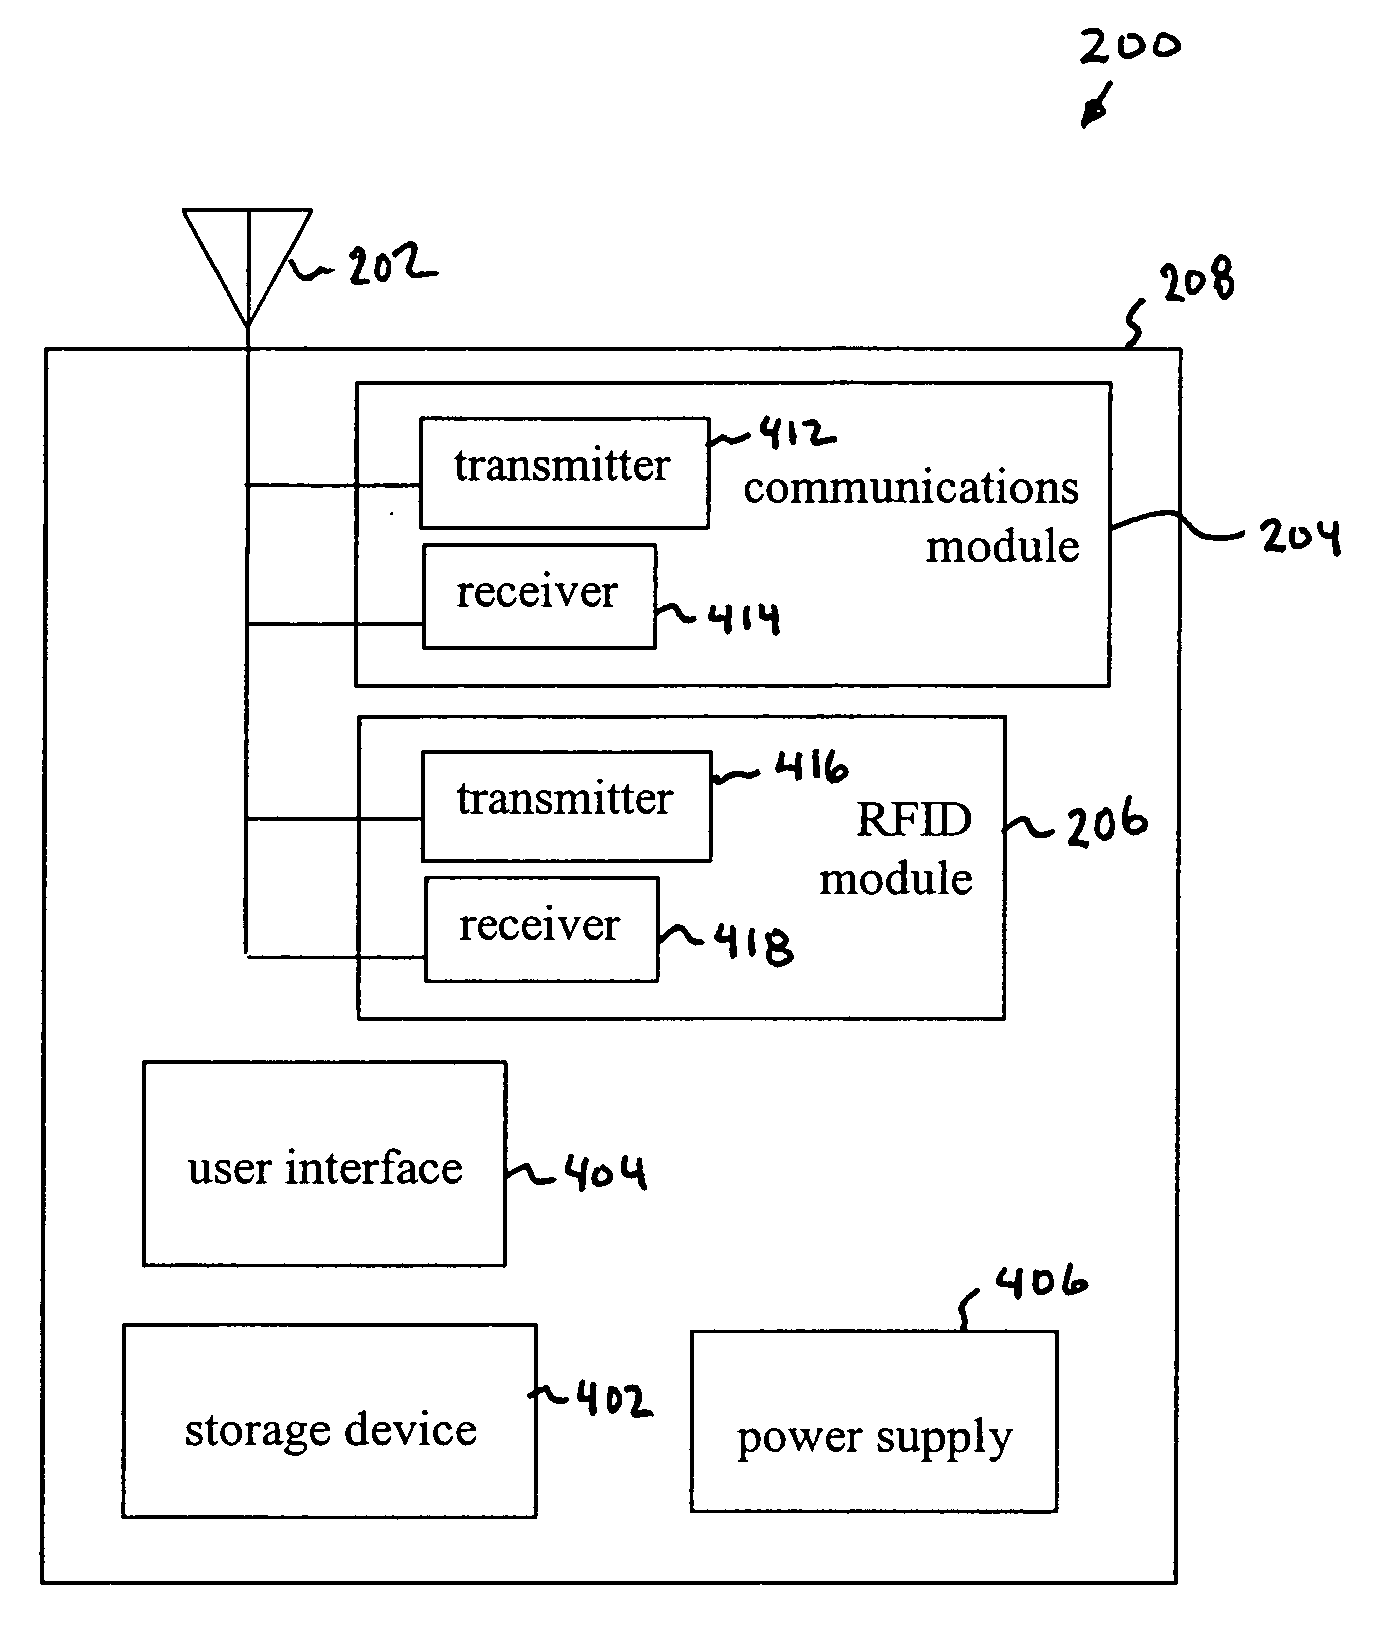 Radio frequency identification (RFID) antenna integration techniques in mobile devices